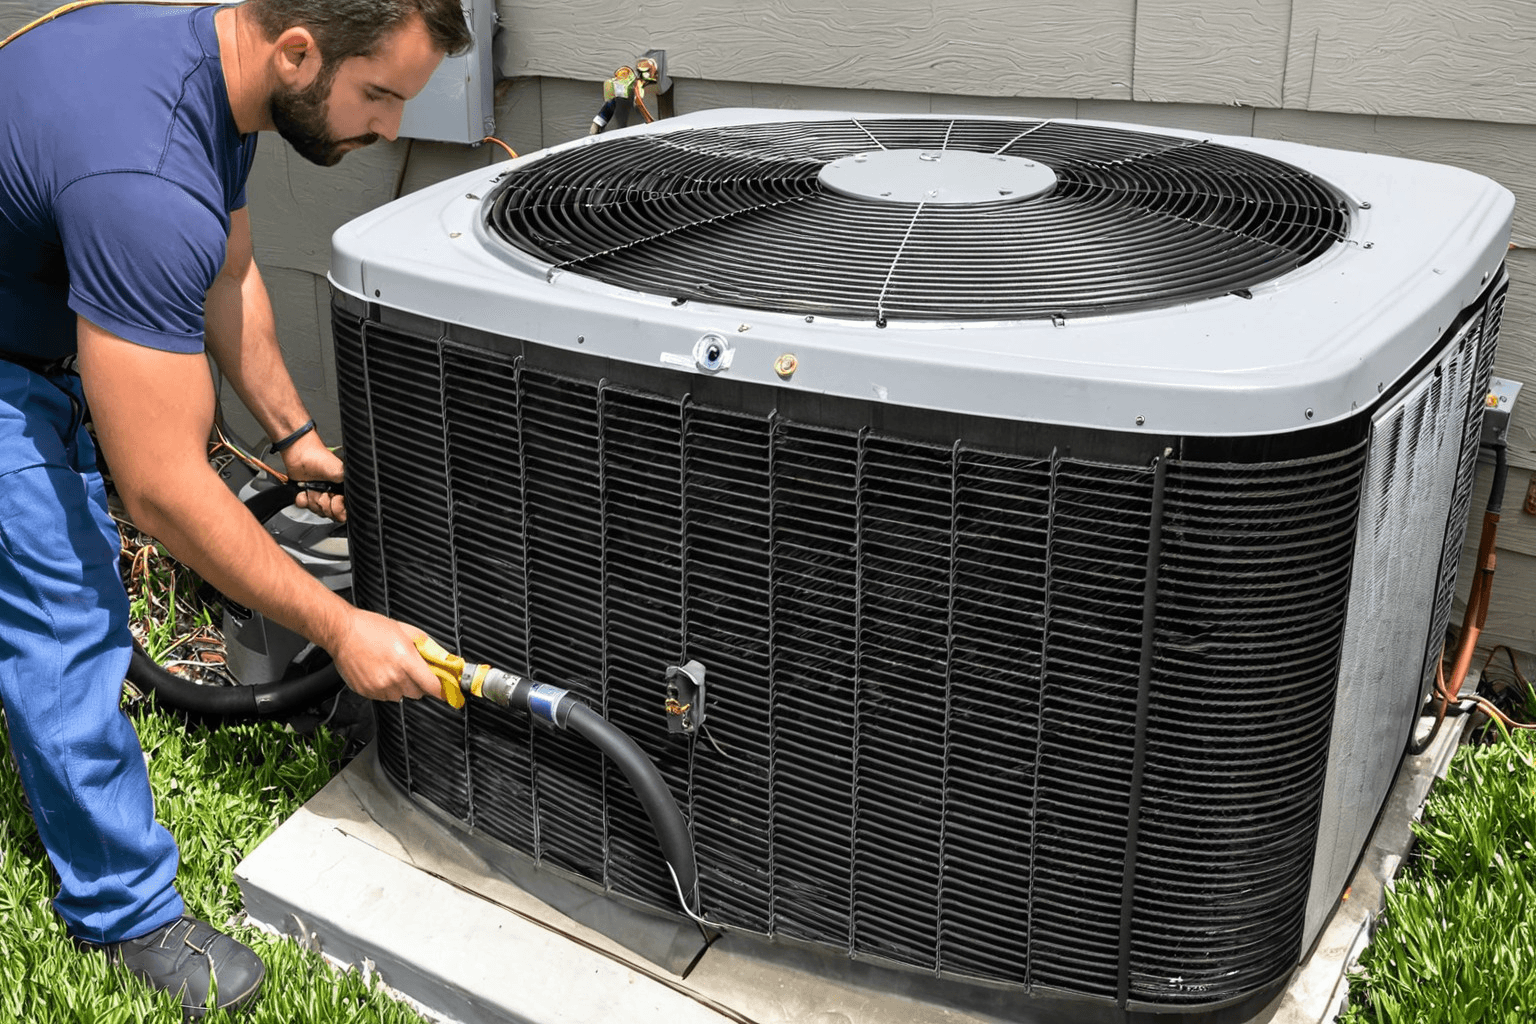 The Important Benefits of Annual AC Tune Ups